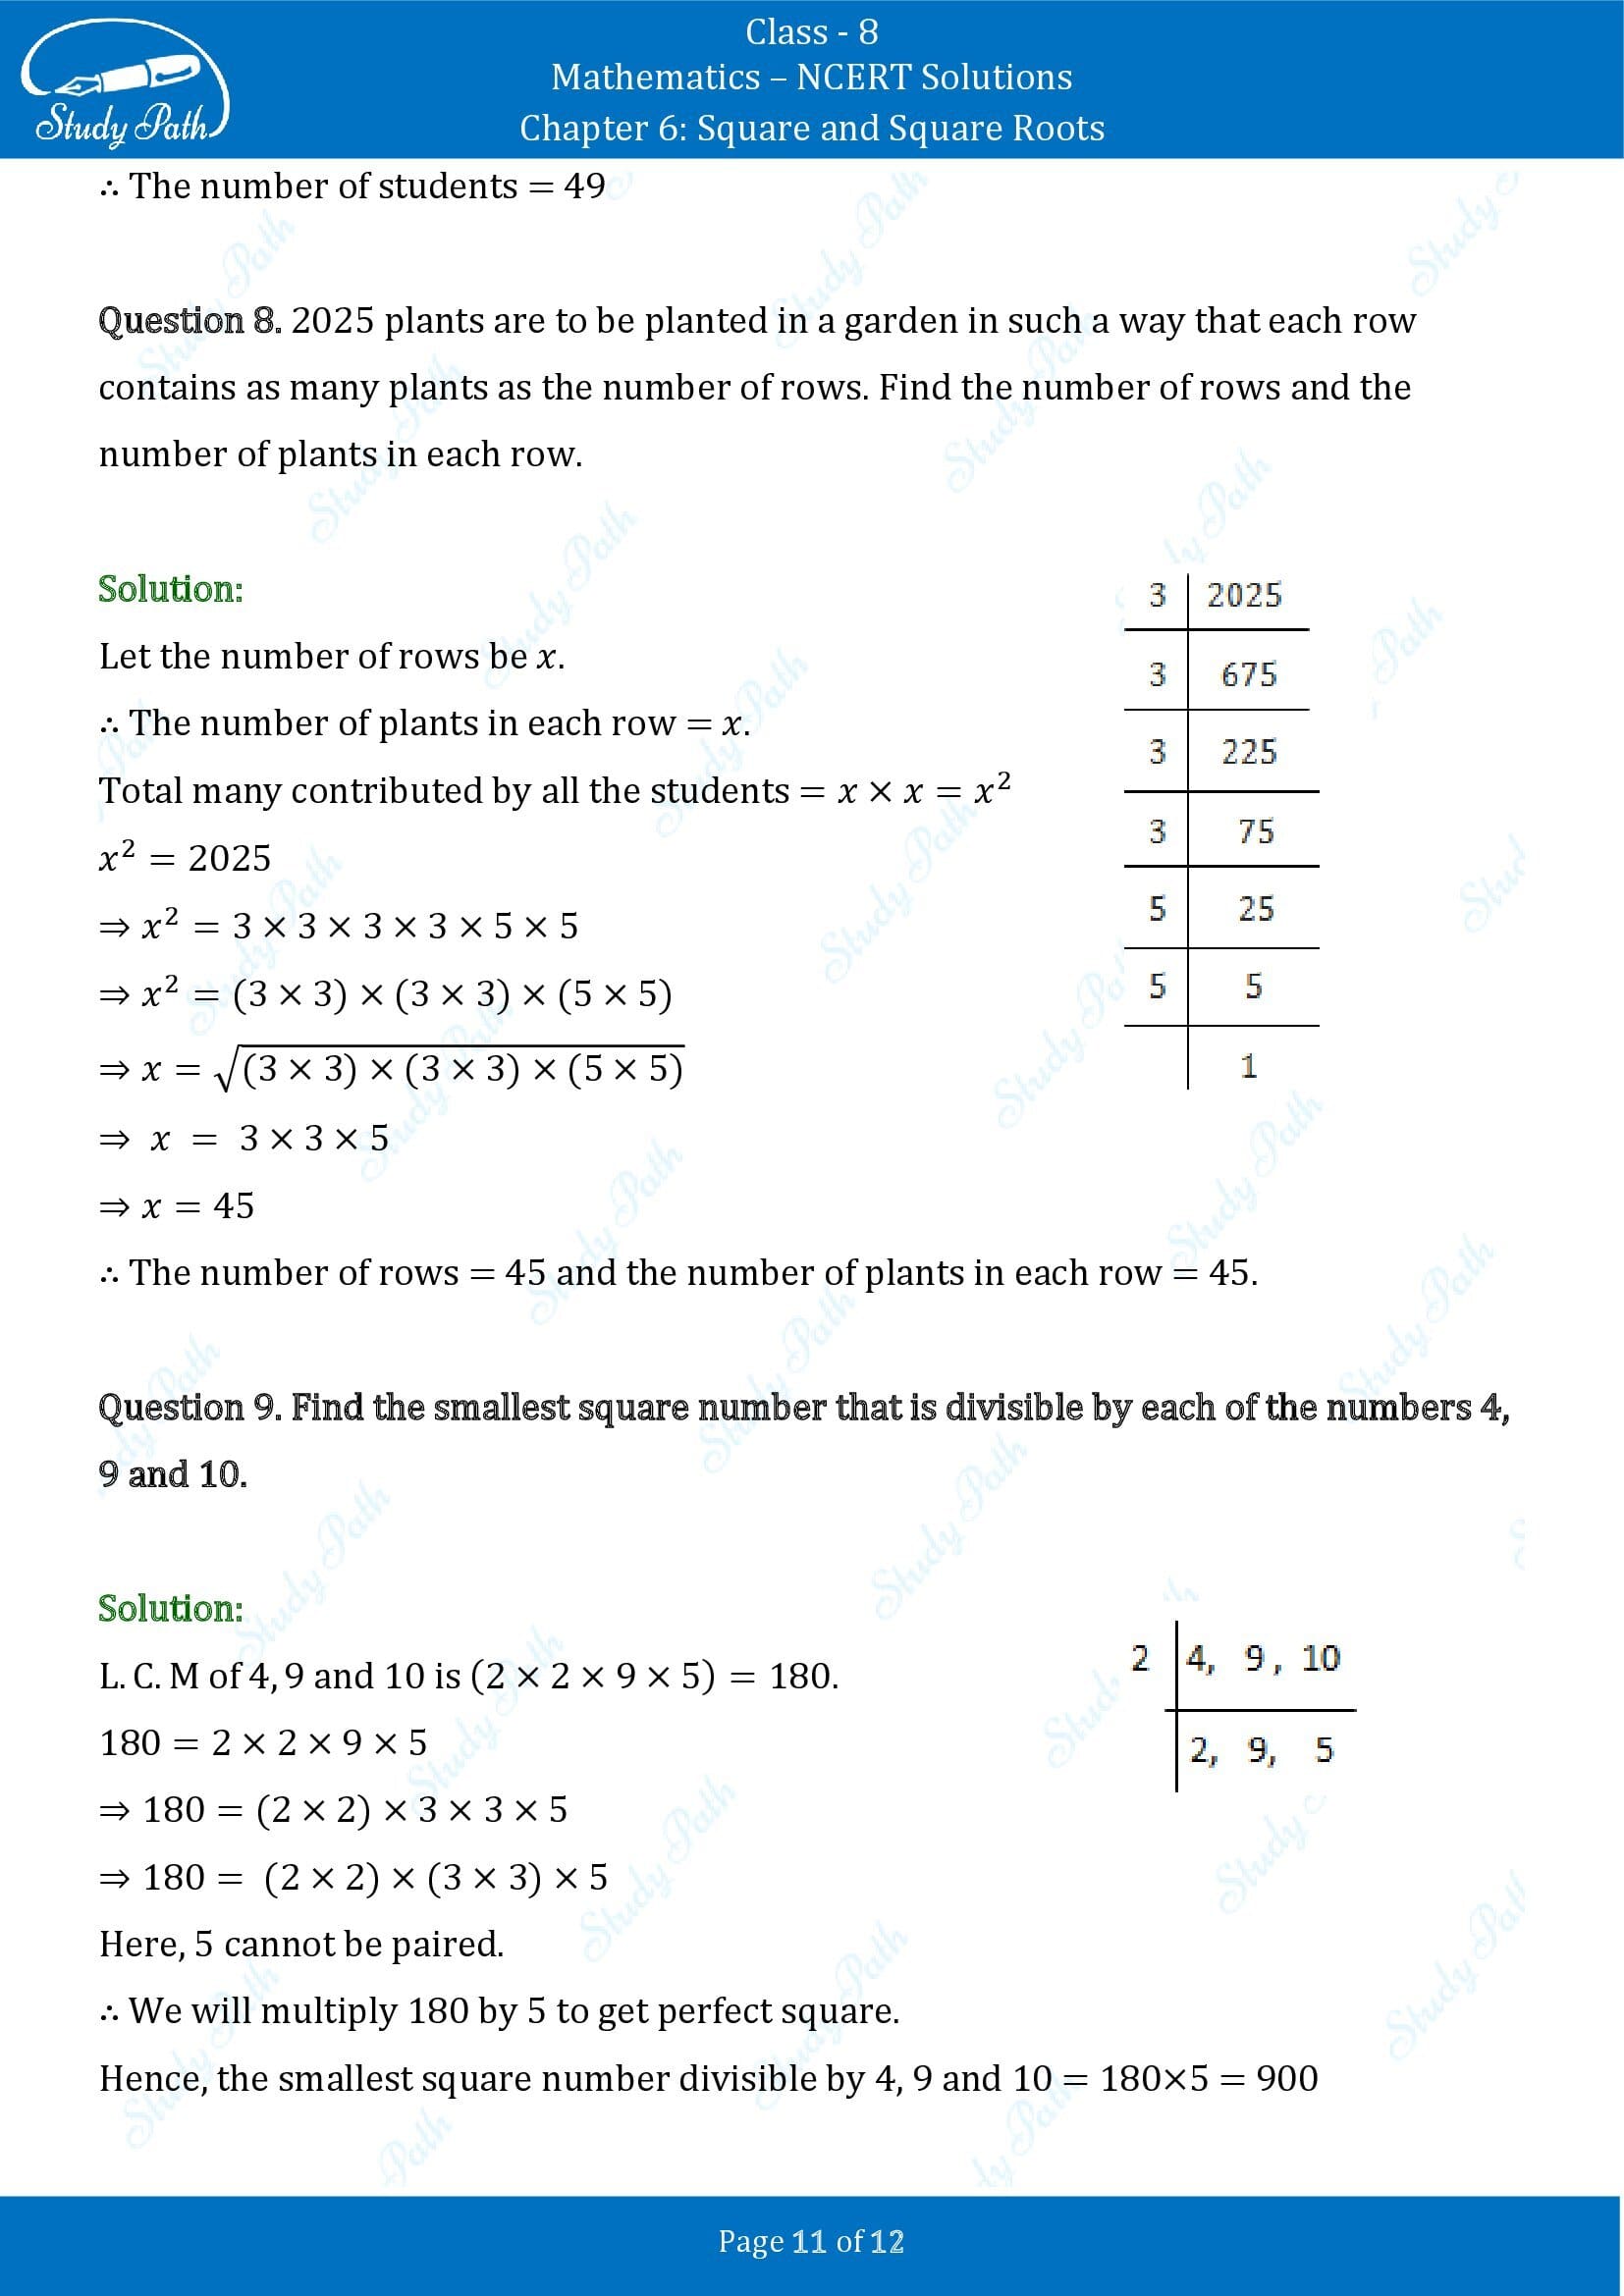 NCERT Solutions for Class 8 Maths Chapter 6 Square and Square Roots Exercise 6.3 00011